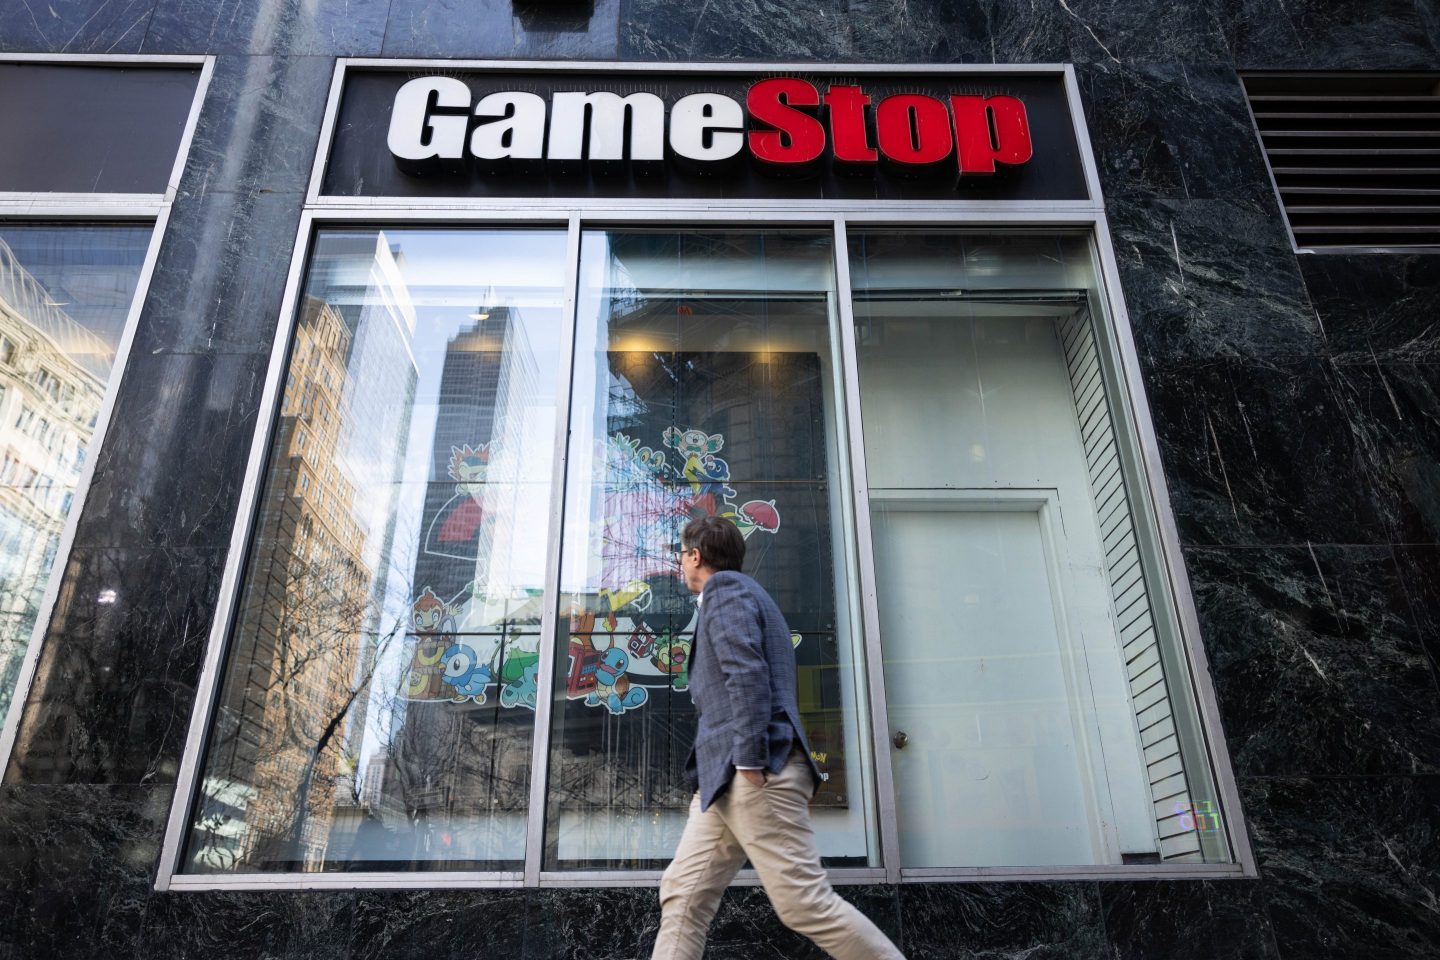 Keith Gill's presence on social media has already caused the price of GameStop to more than double.